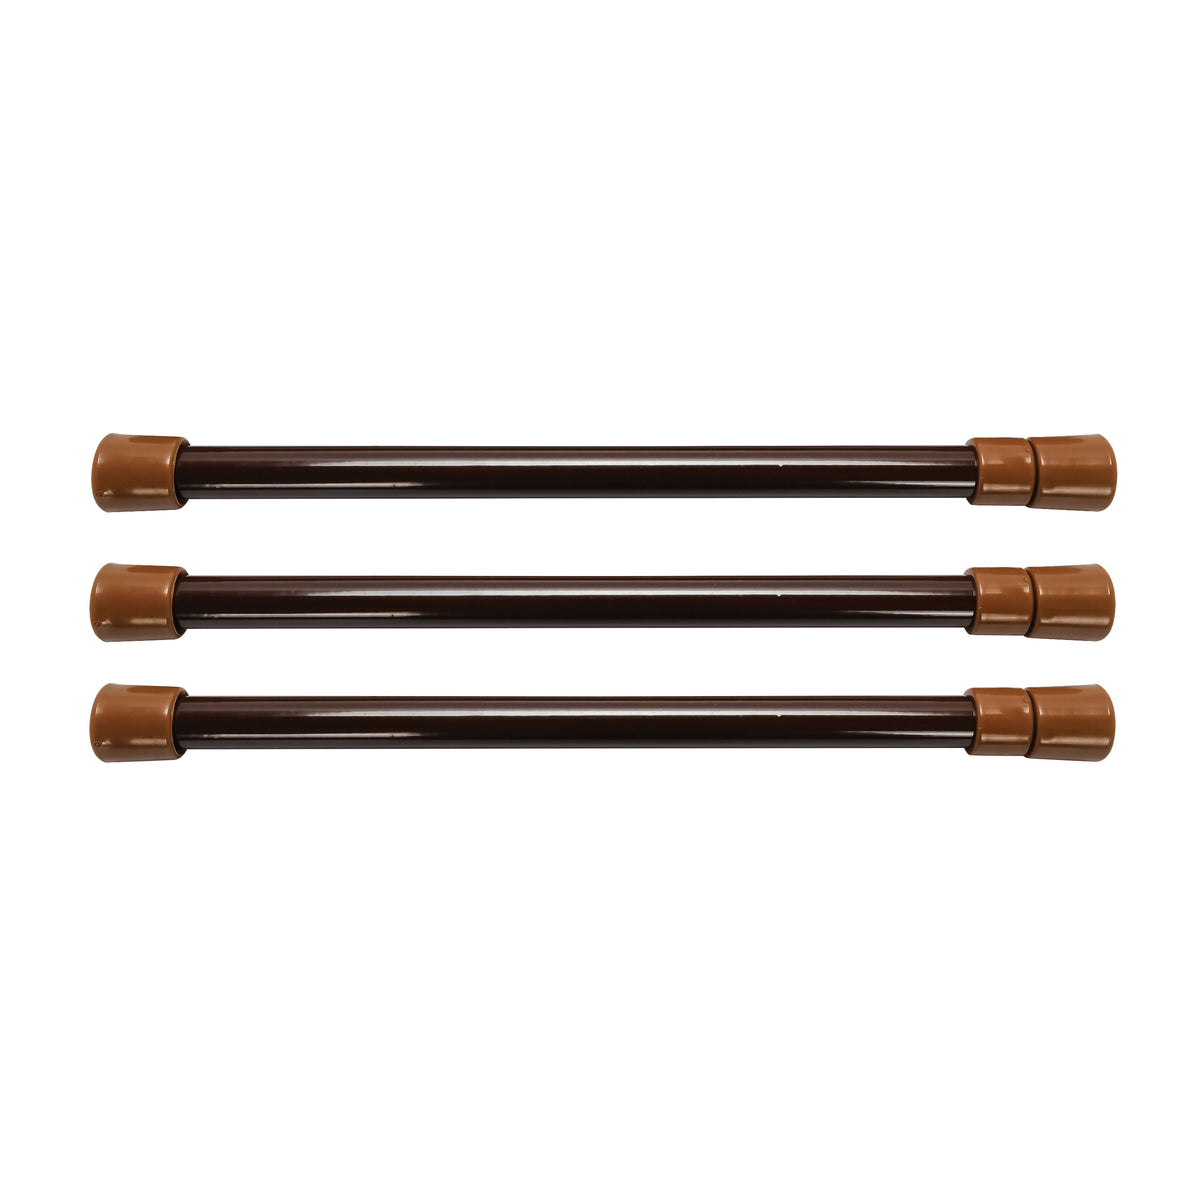 Camco 44066 Cupboard Bars 10" to 17" - Brown, Pack of 3